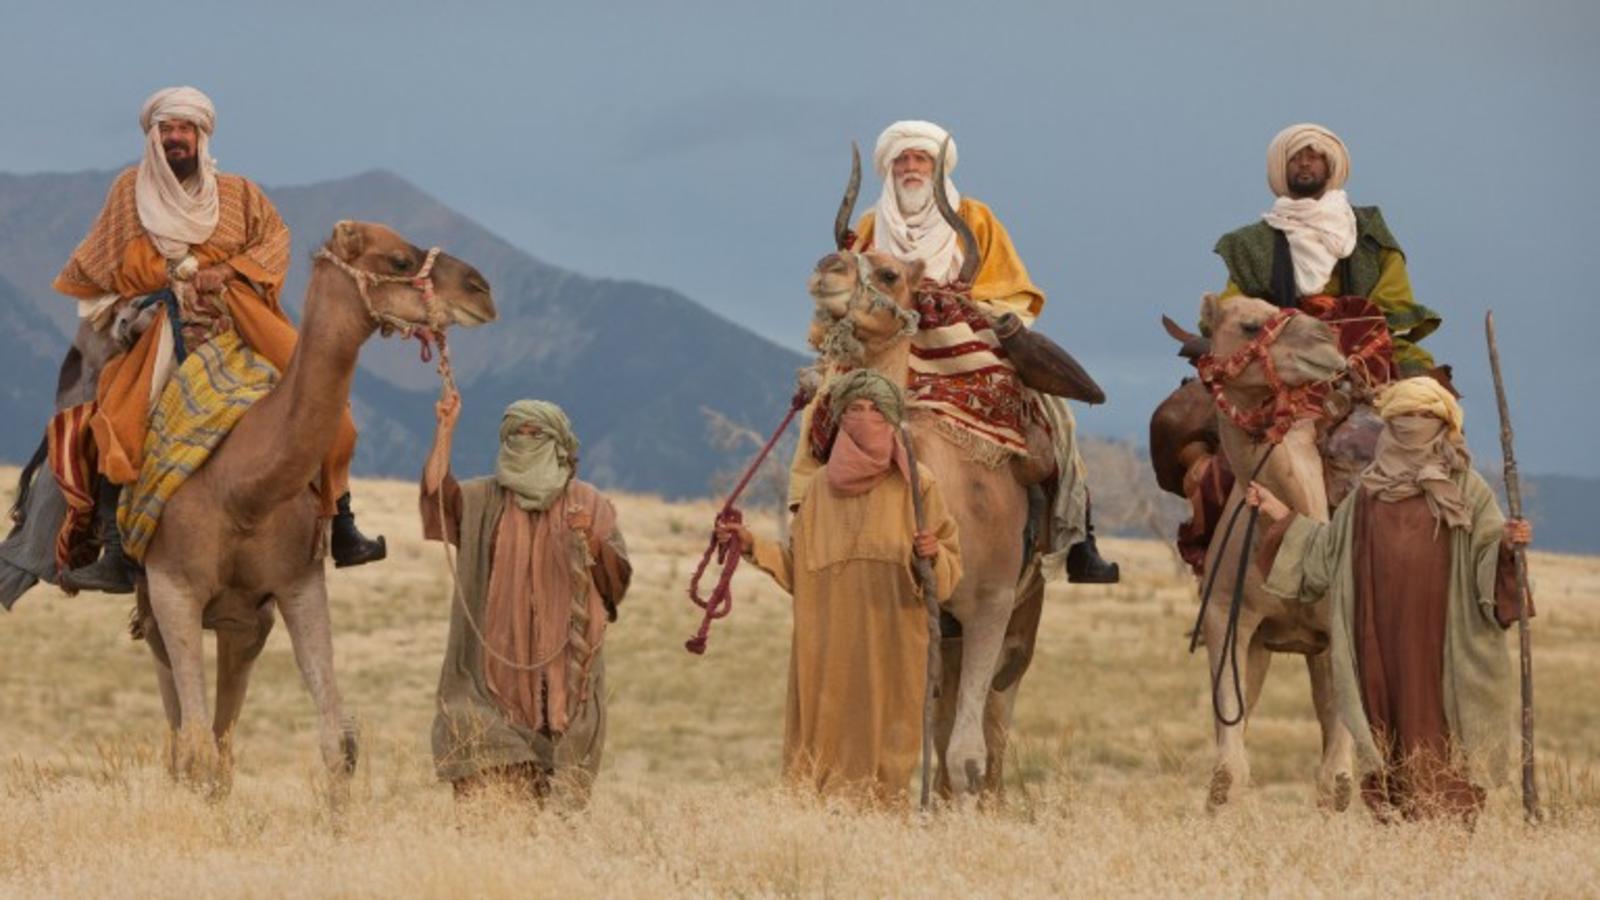 How many wise men were there?